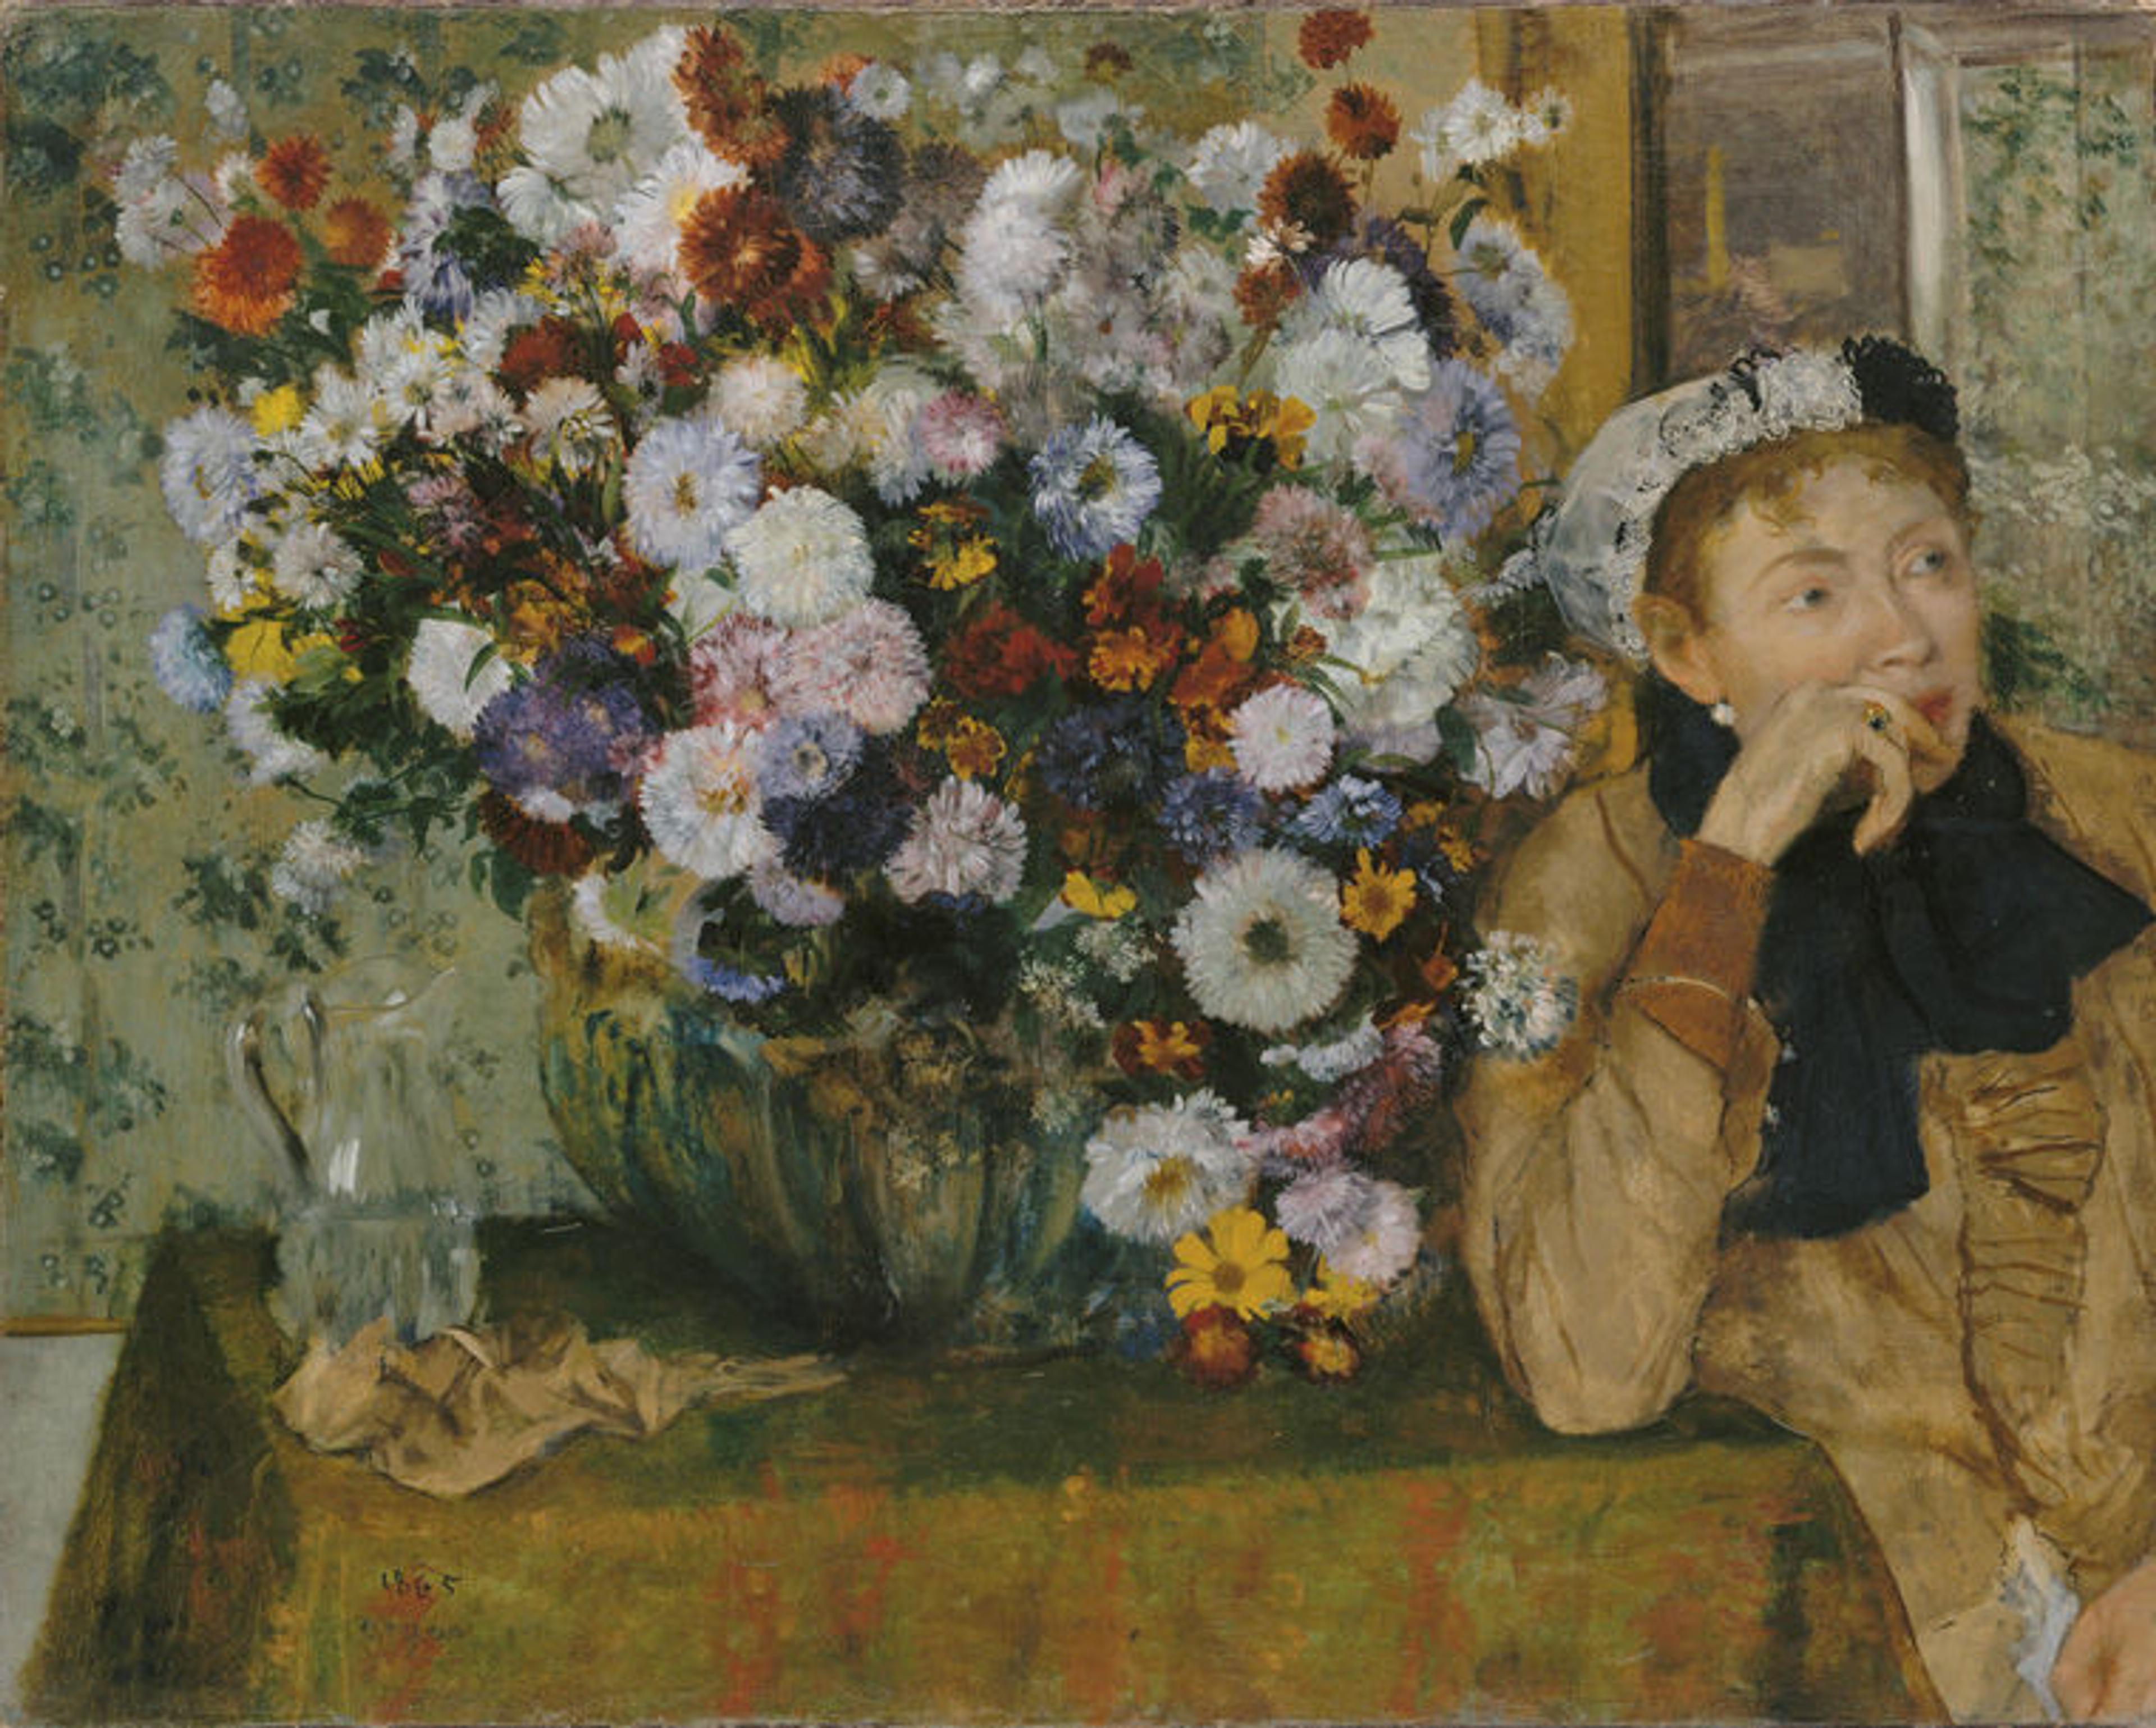 Oil painting by Edgar Degas showing a woman in a heavy coat and headpiece seated beside a vase of flowers in full bloom